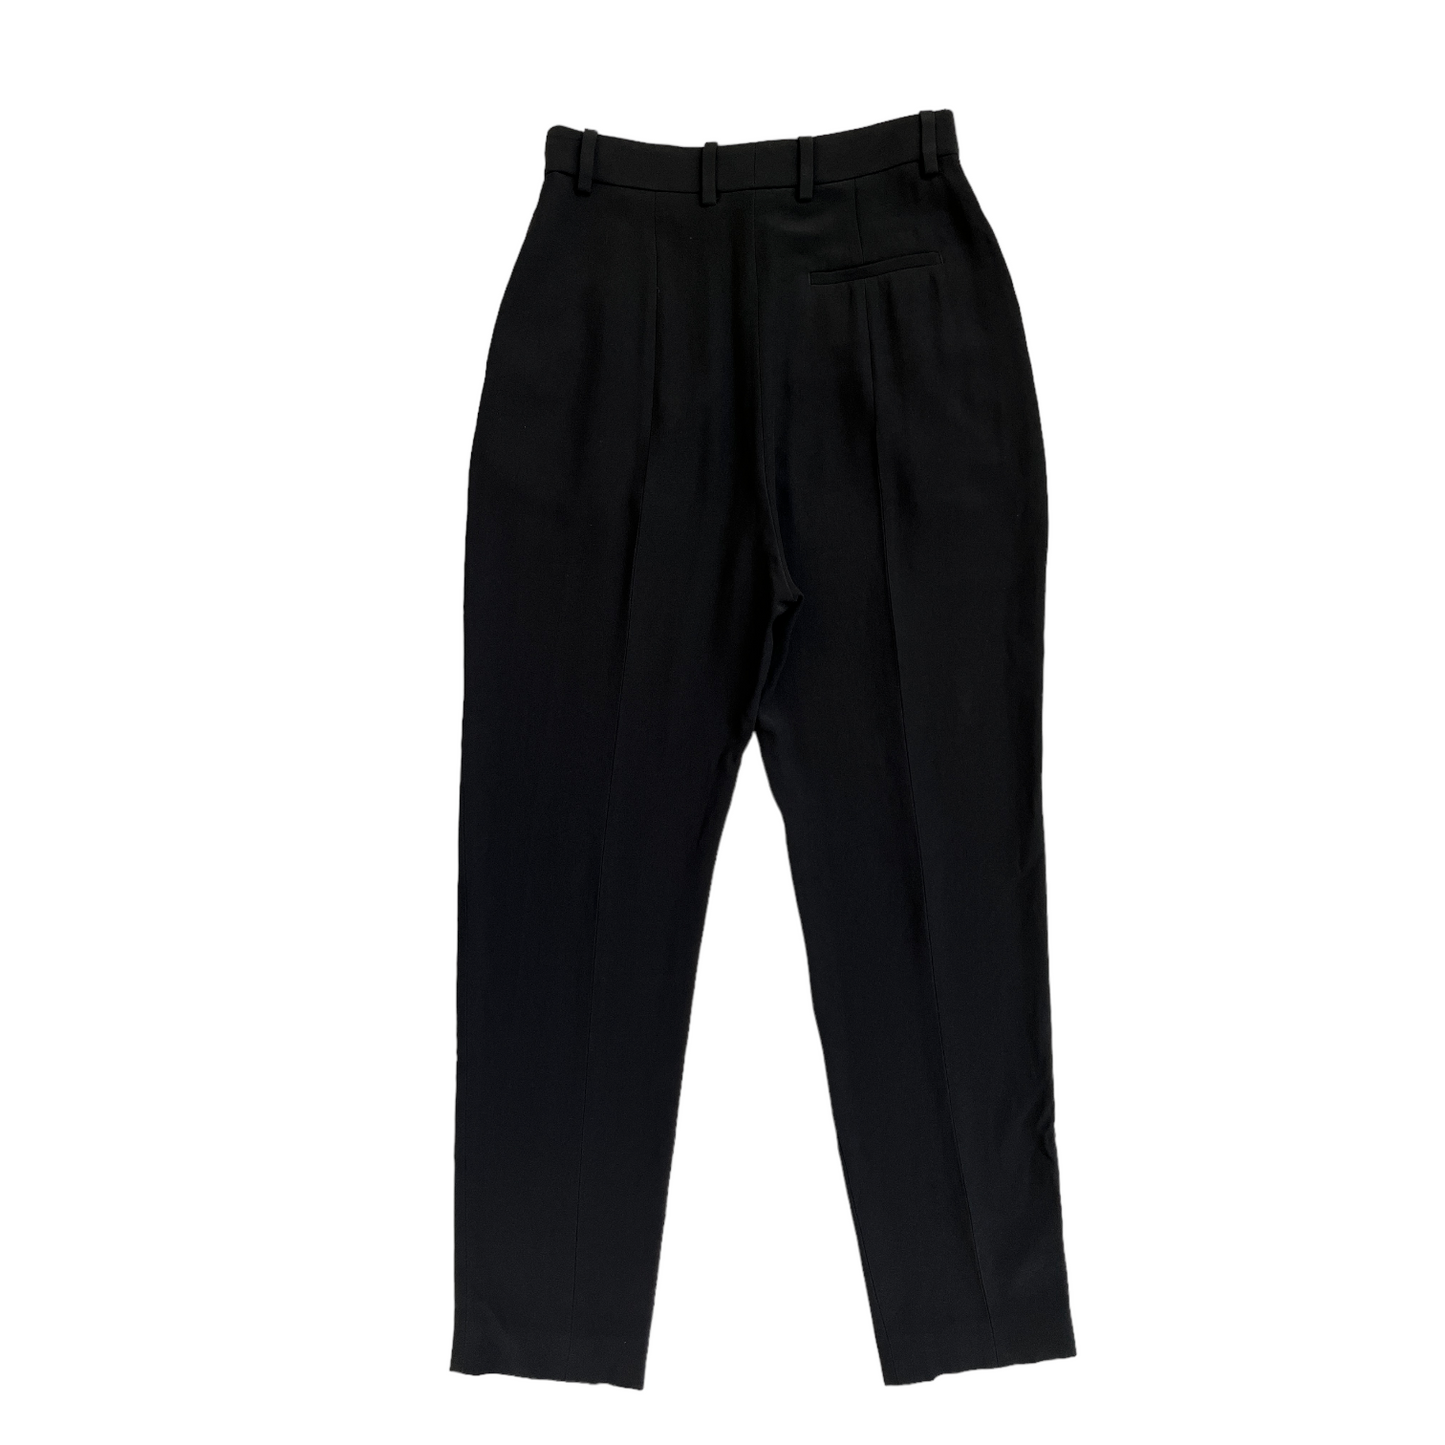 Alexander McQueen High Waisted Cigarette Pant in Black